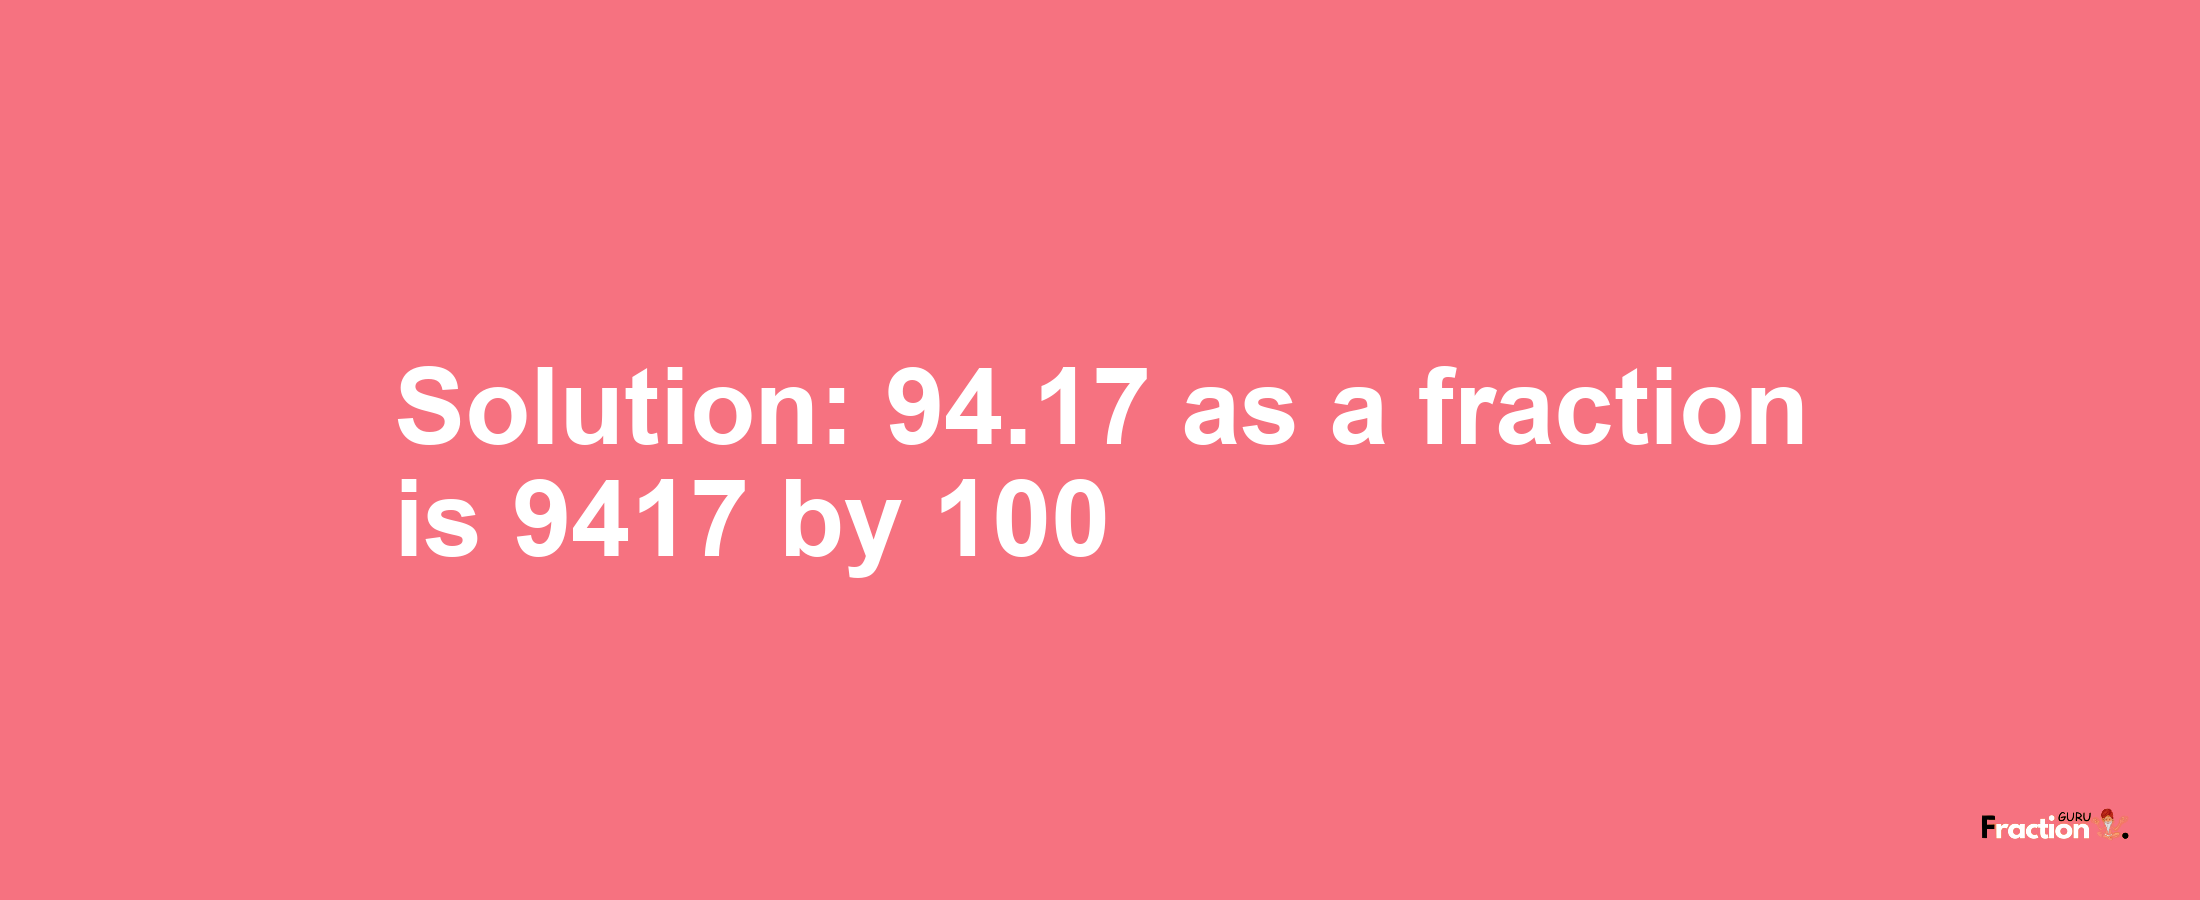 Solution:94.17 as a fraction is 9417/100